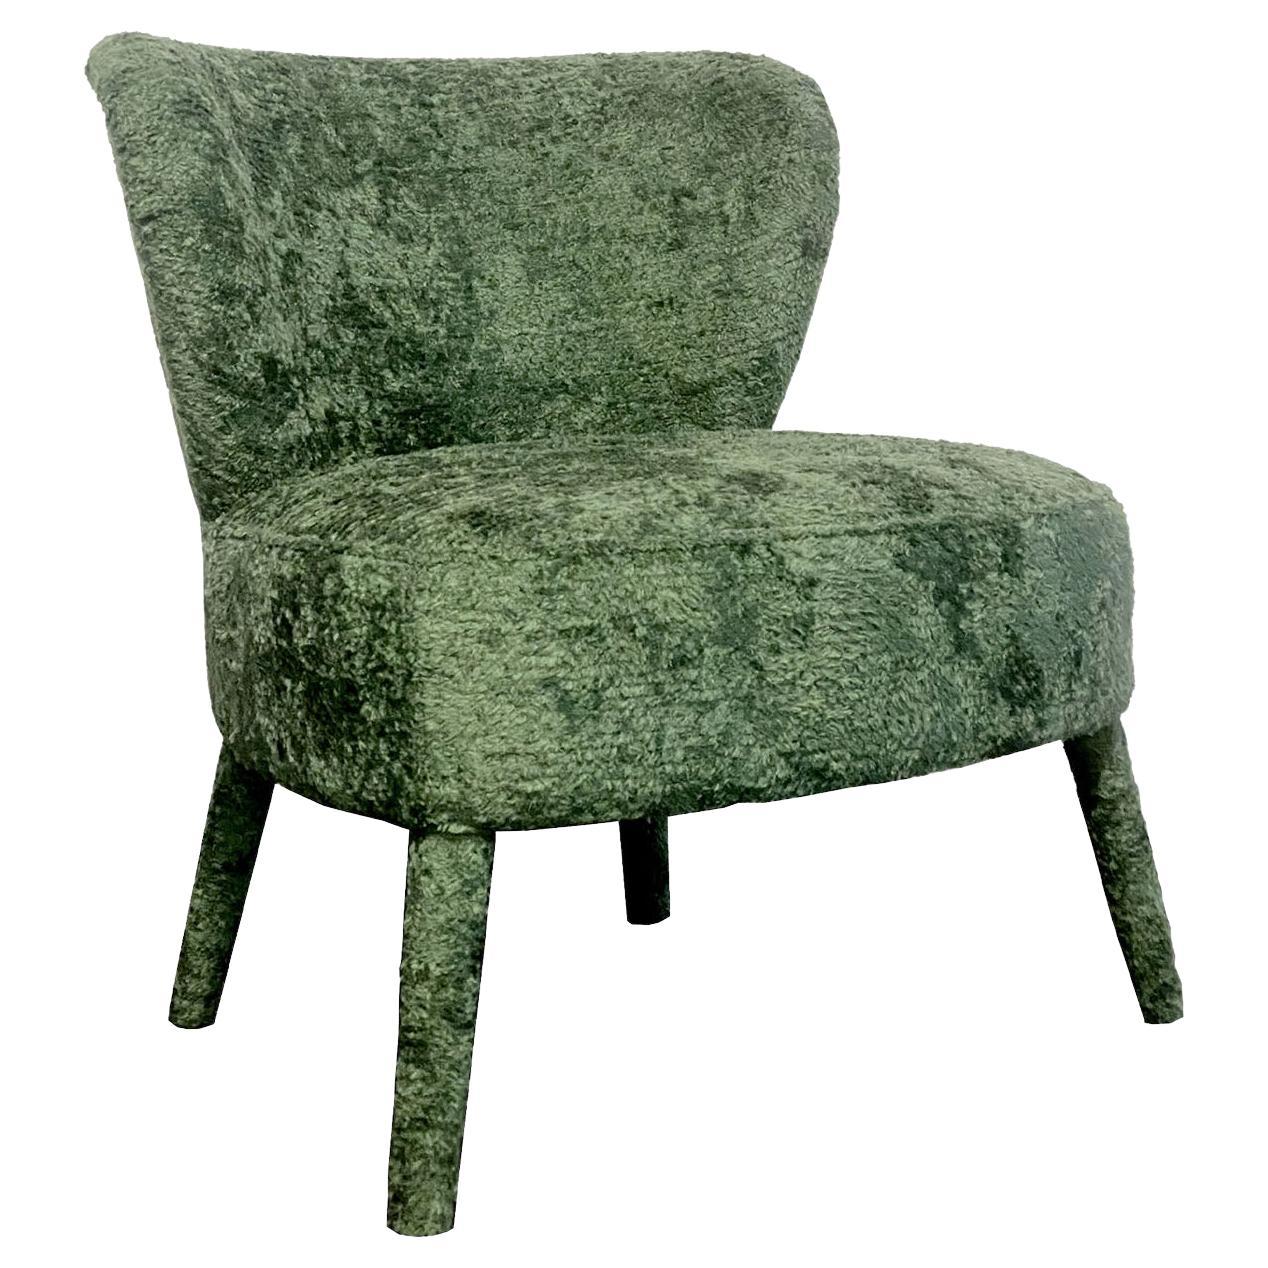 Cloe' Upholstered Green Lounge Chair For Sale